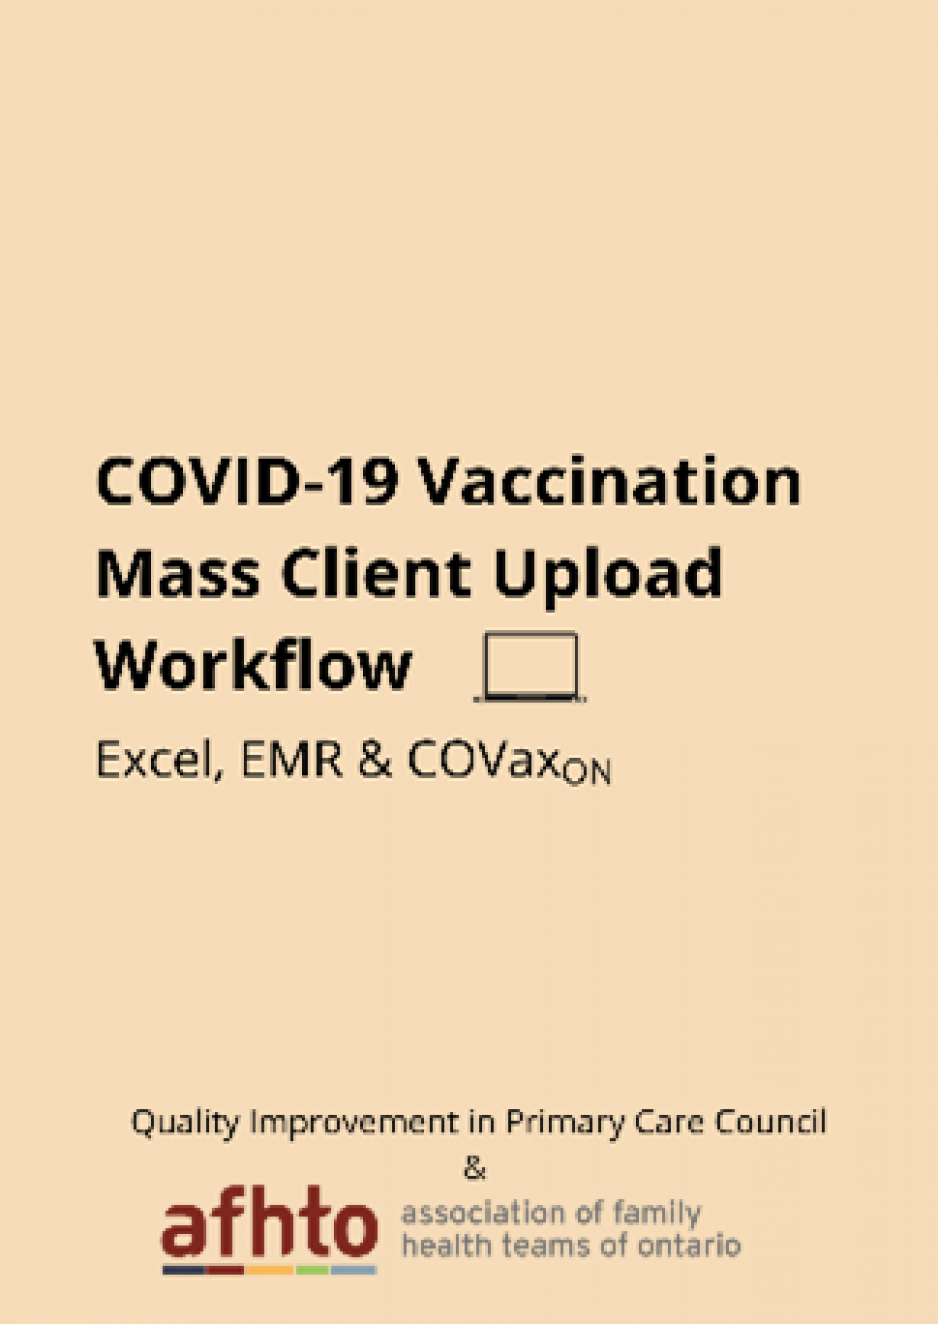 COVID-19 vaccination mass client upload workflow